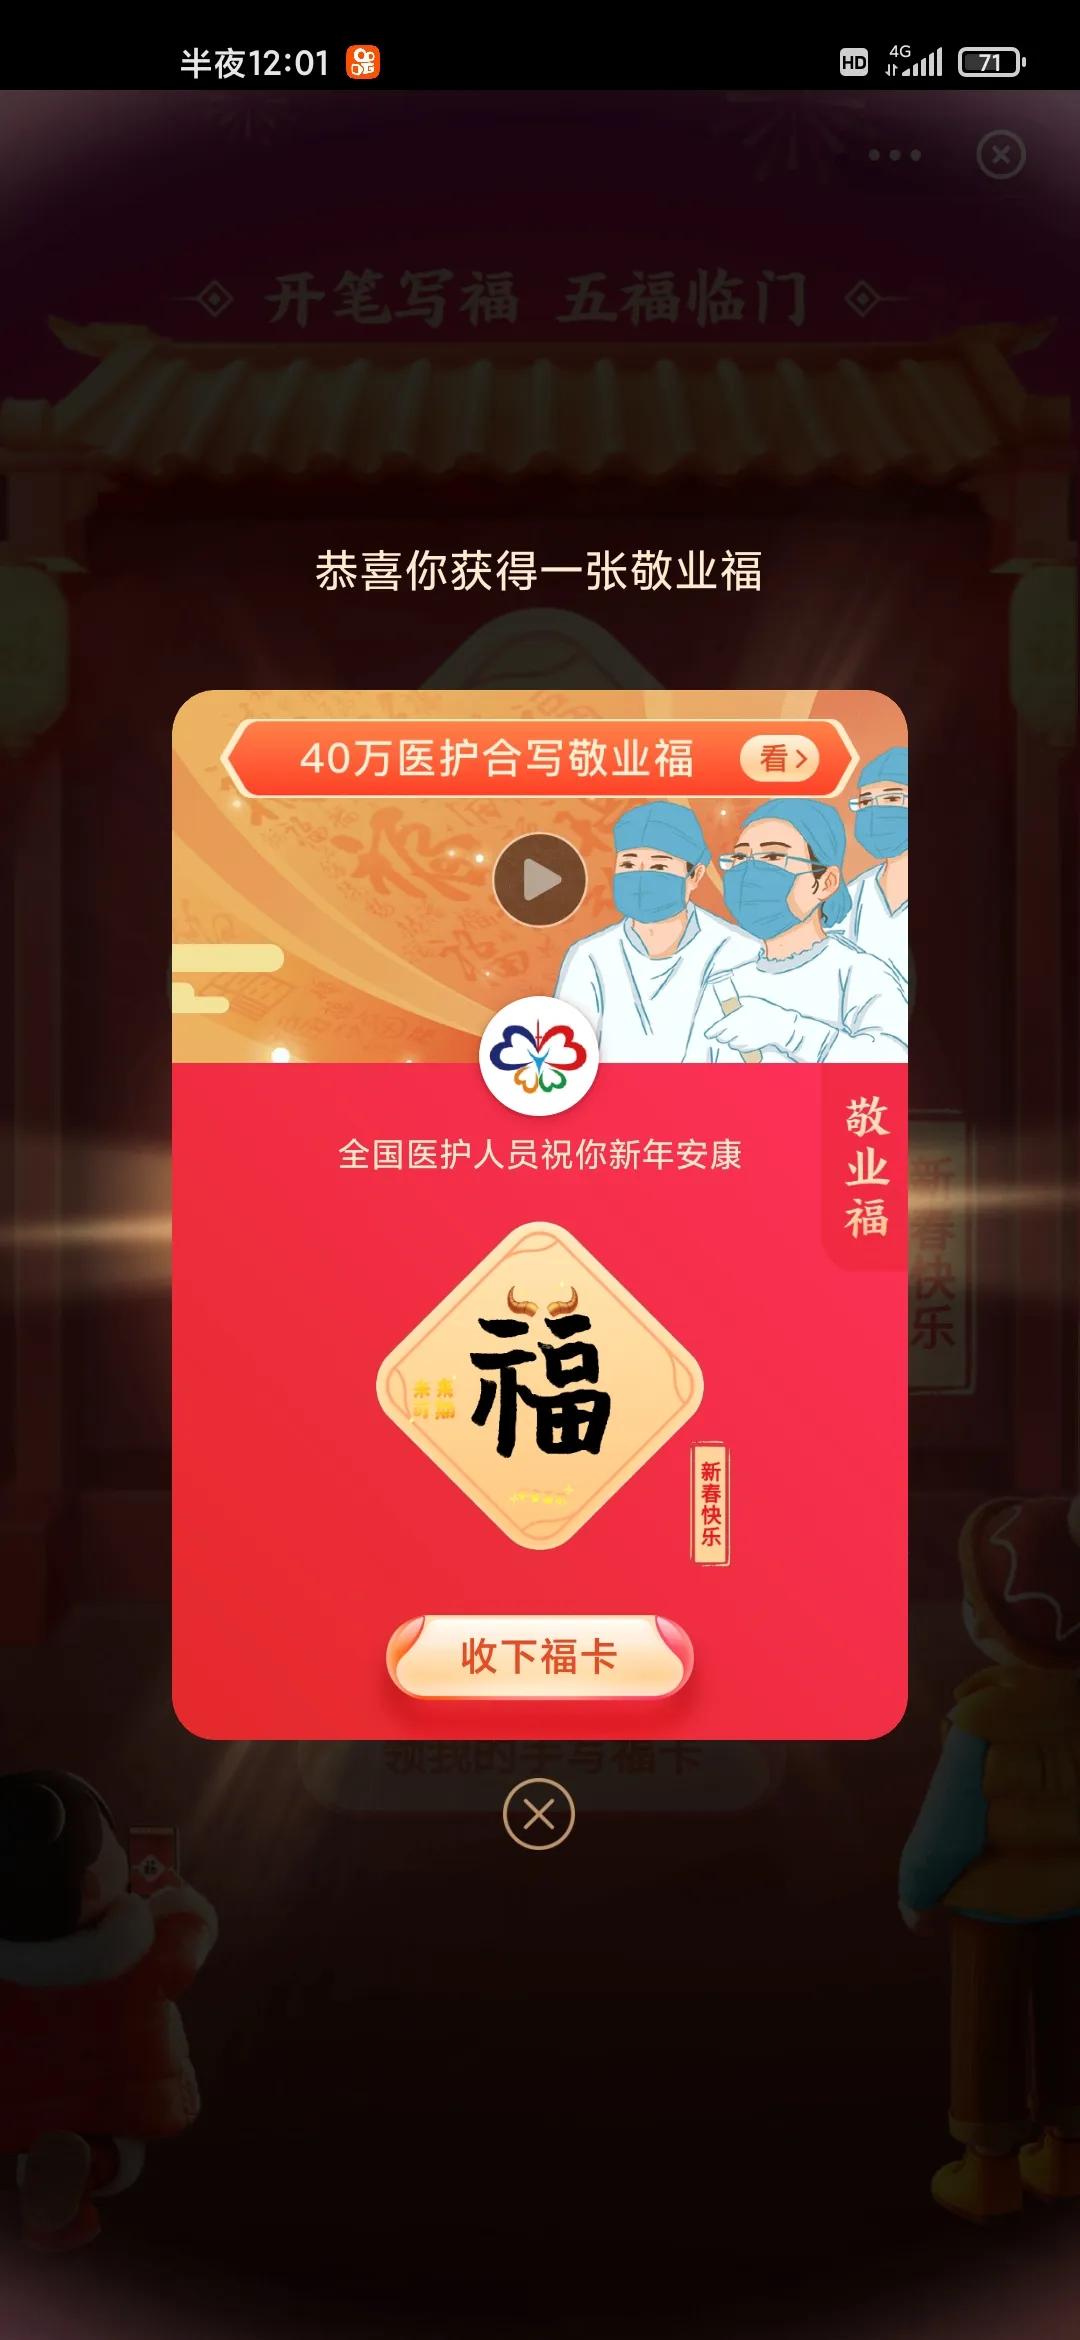 Pay treasure collect 5 good fortune this year so simple? Is the first Jing Yefu? 